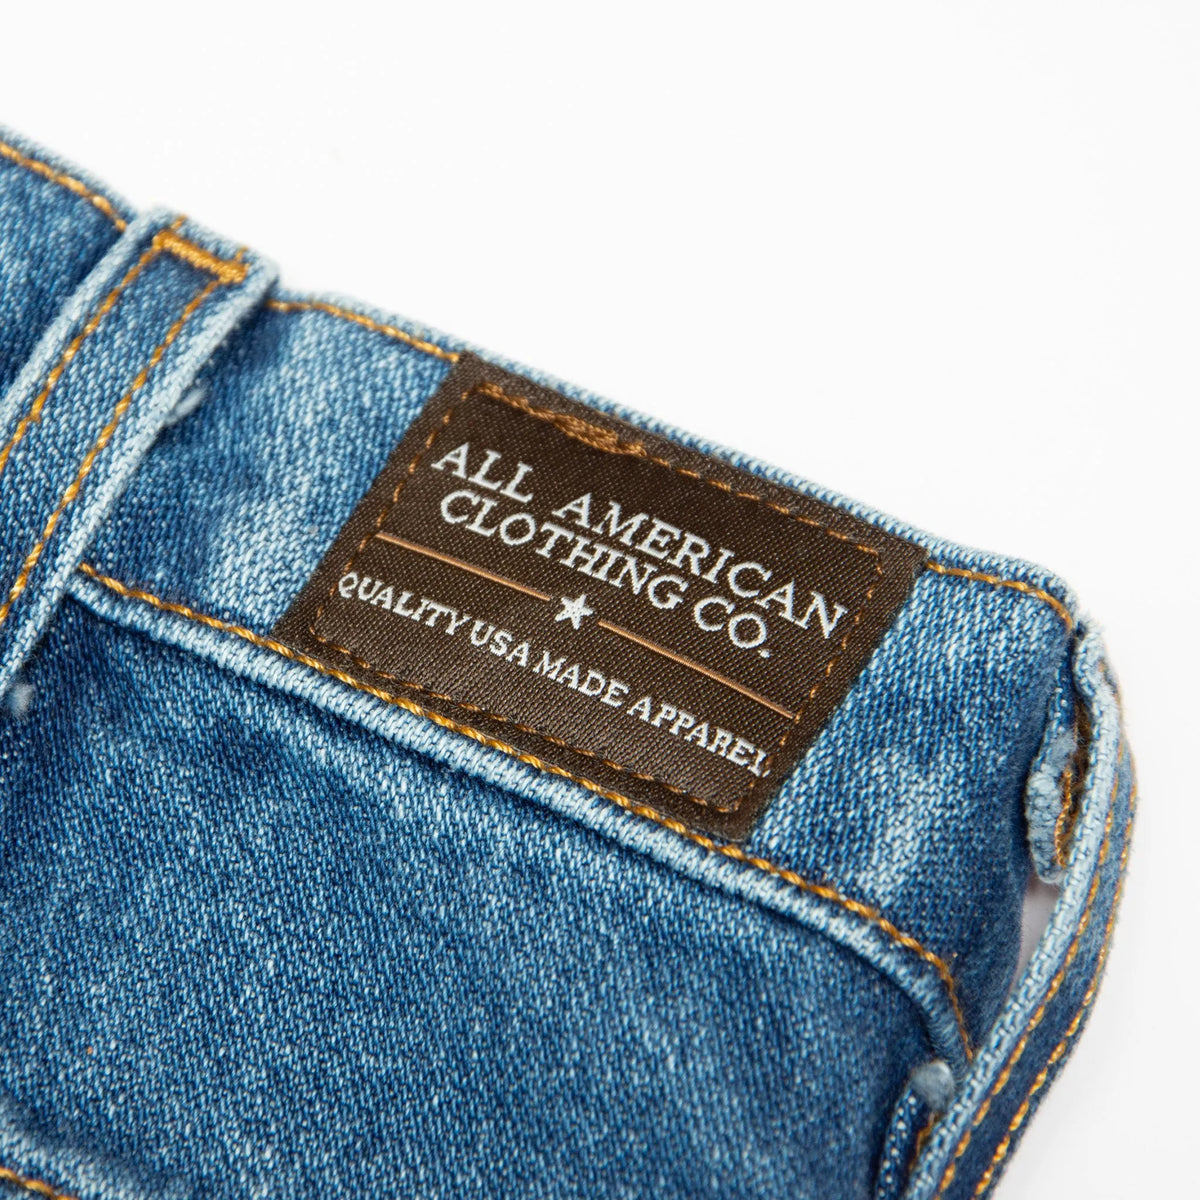 Branded Rugged Denim Jeans at Best Price in New Delhi | L & M Fashions Mart